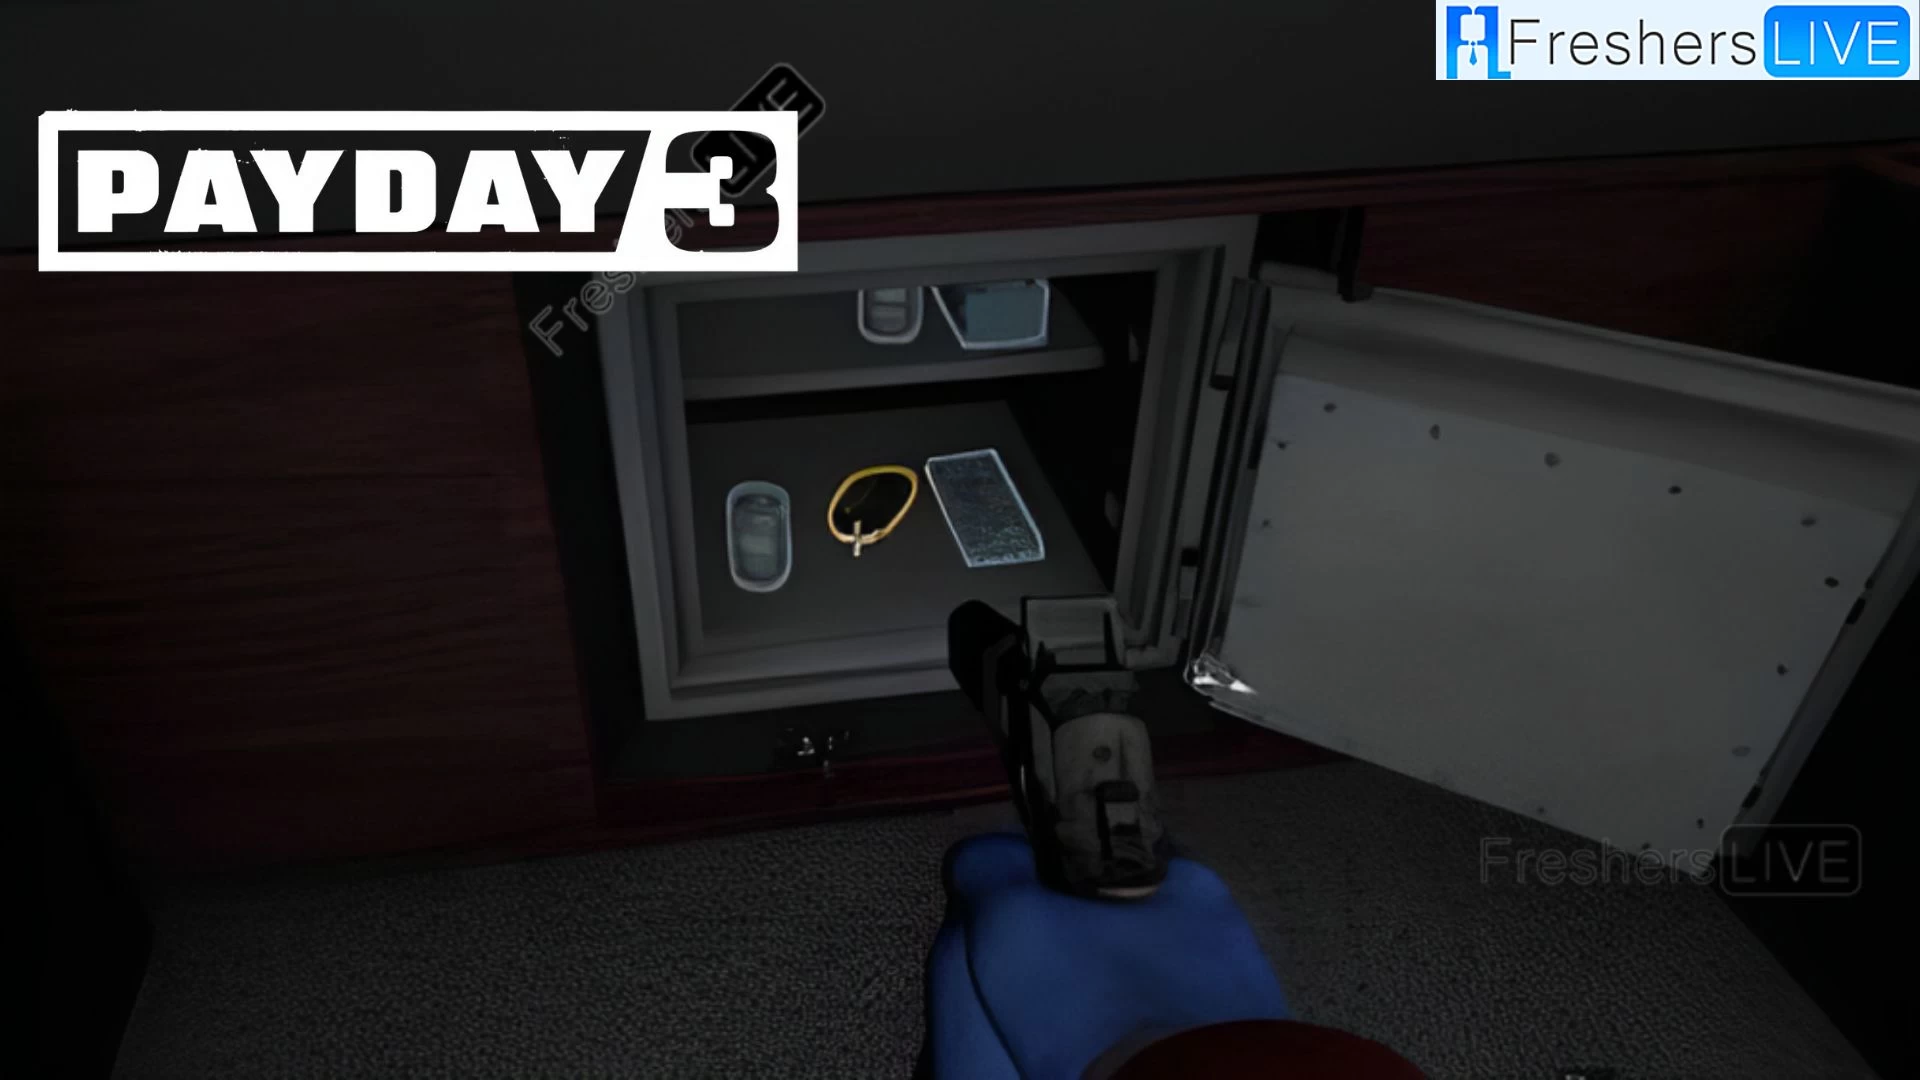 Payday 3 Flash Drive Location, Where is Flash Drive Located?